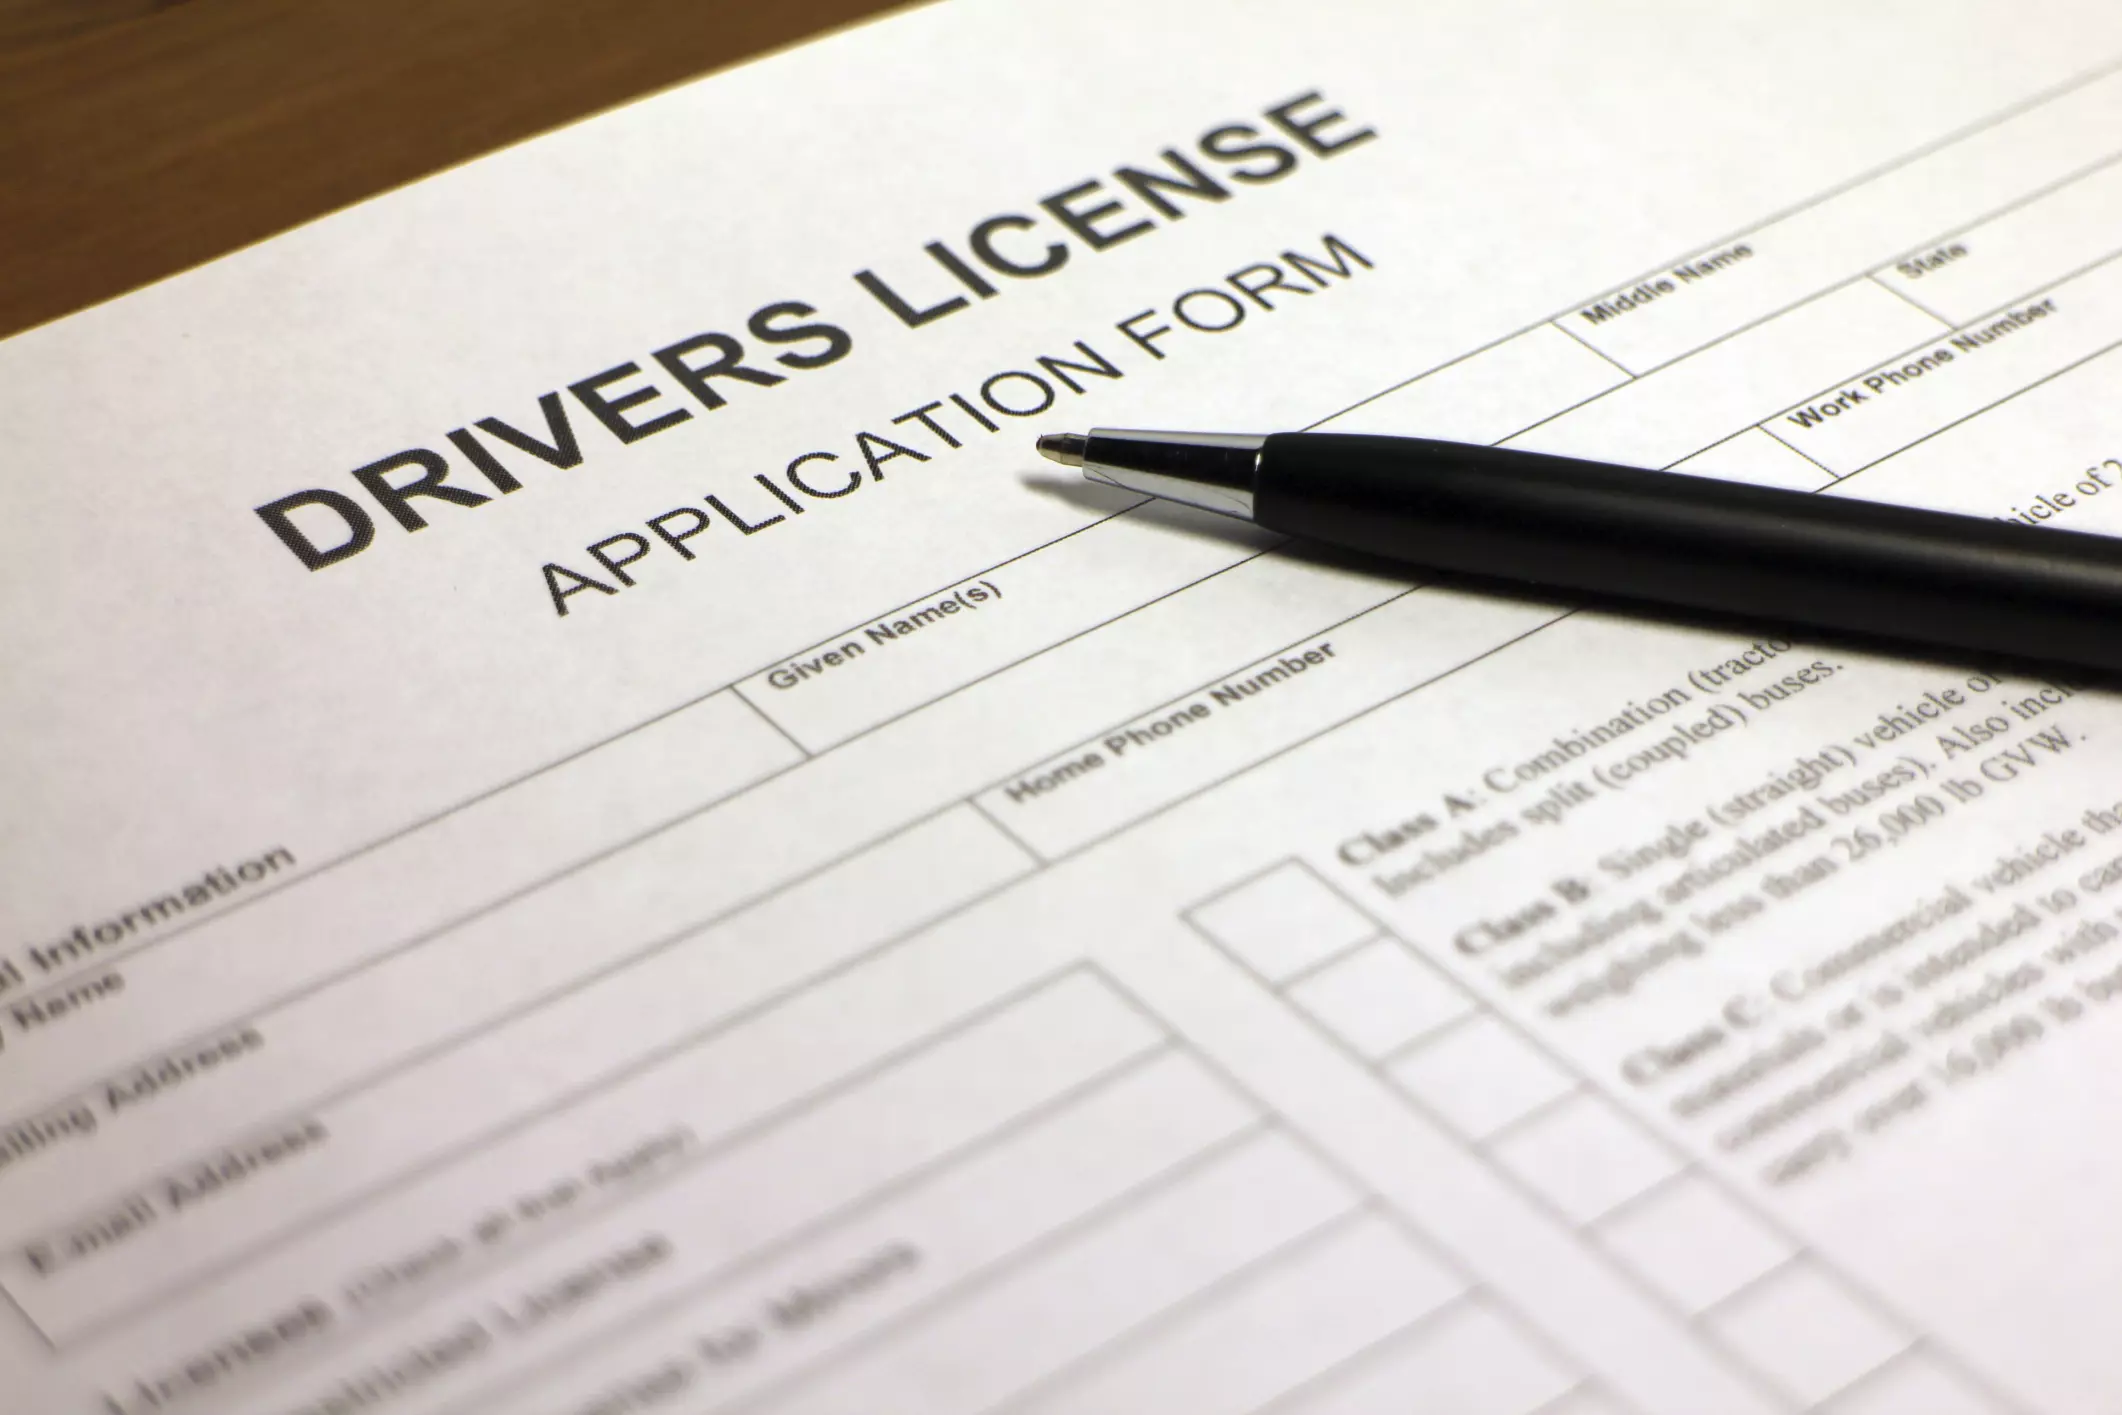 Redesigned NYS driver license rolled out, Local News